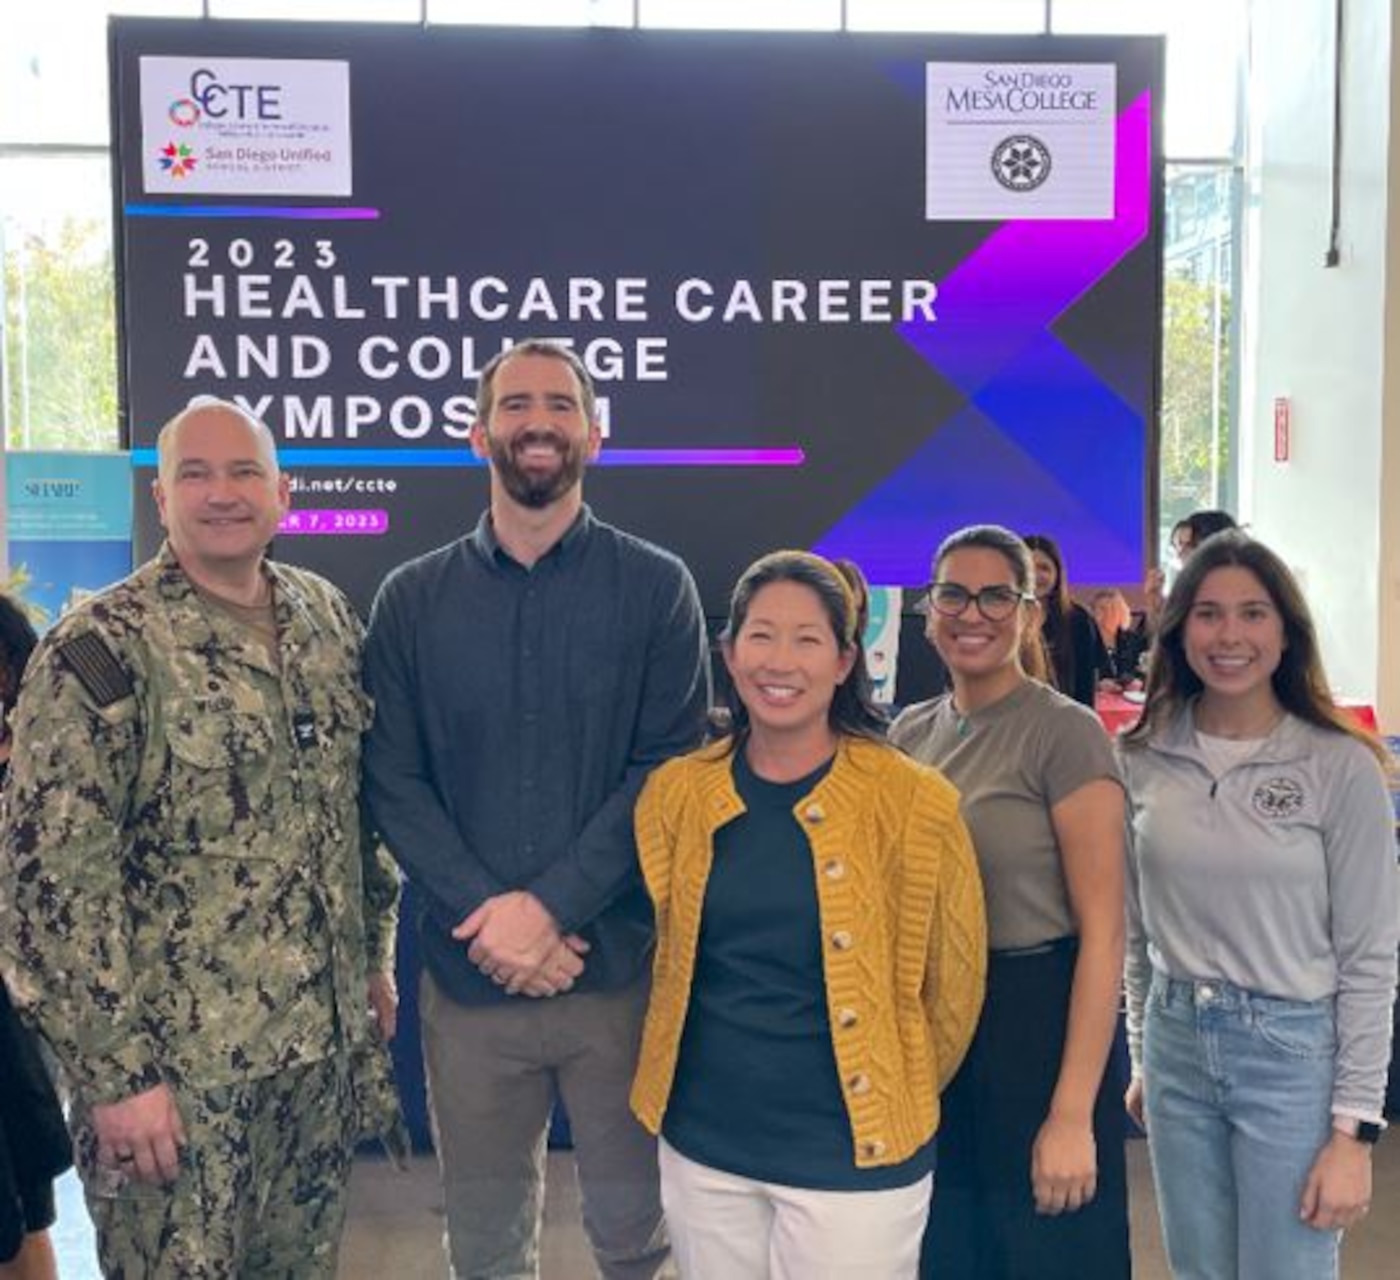 SAN DIEGO (Dec. 7, 2023) Naval Health Research Center (NHRC) staff (from left to right) Capt. Eric Welsh, Tyler Whittier, Dr. Pinata Sessoms, Hedaya Rizeq and Carlie Daquino staffed the NHRC booth at the Health Career & College symposium. 

Supporting STEM programs is a fundamental part of NHRC’s community outreach effort. (U.S. Navy photo by John Marciano/released)